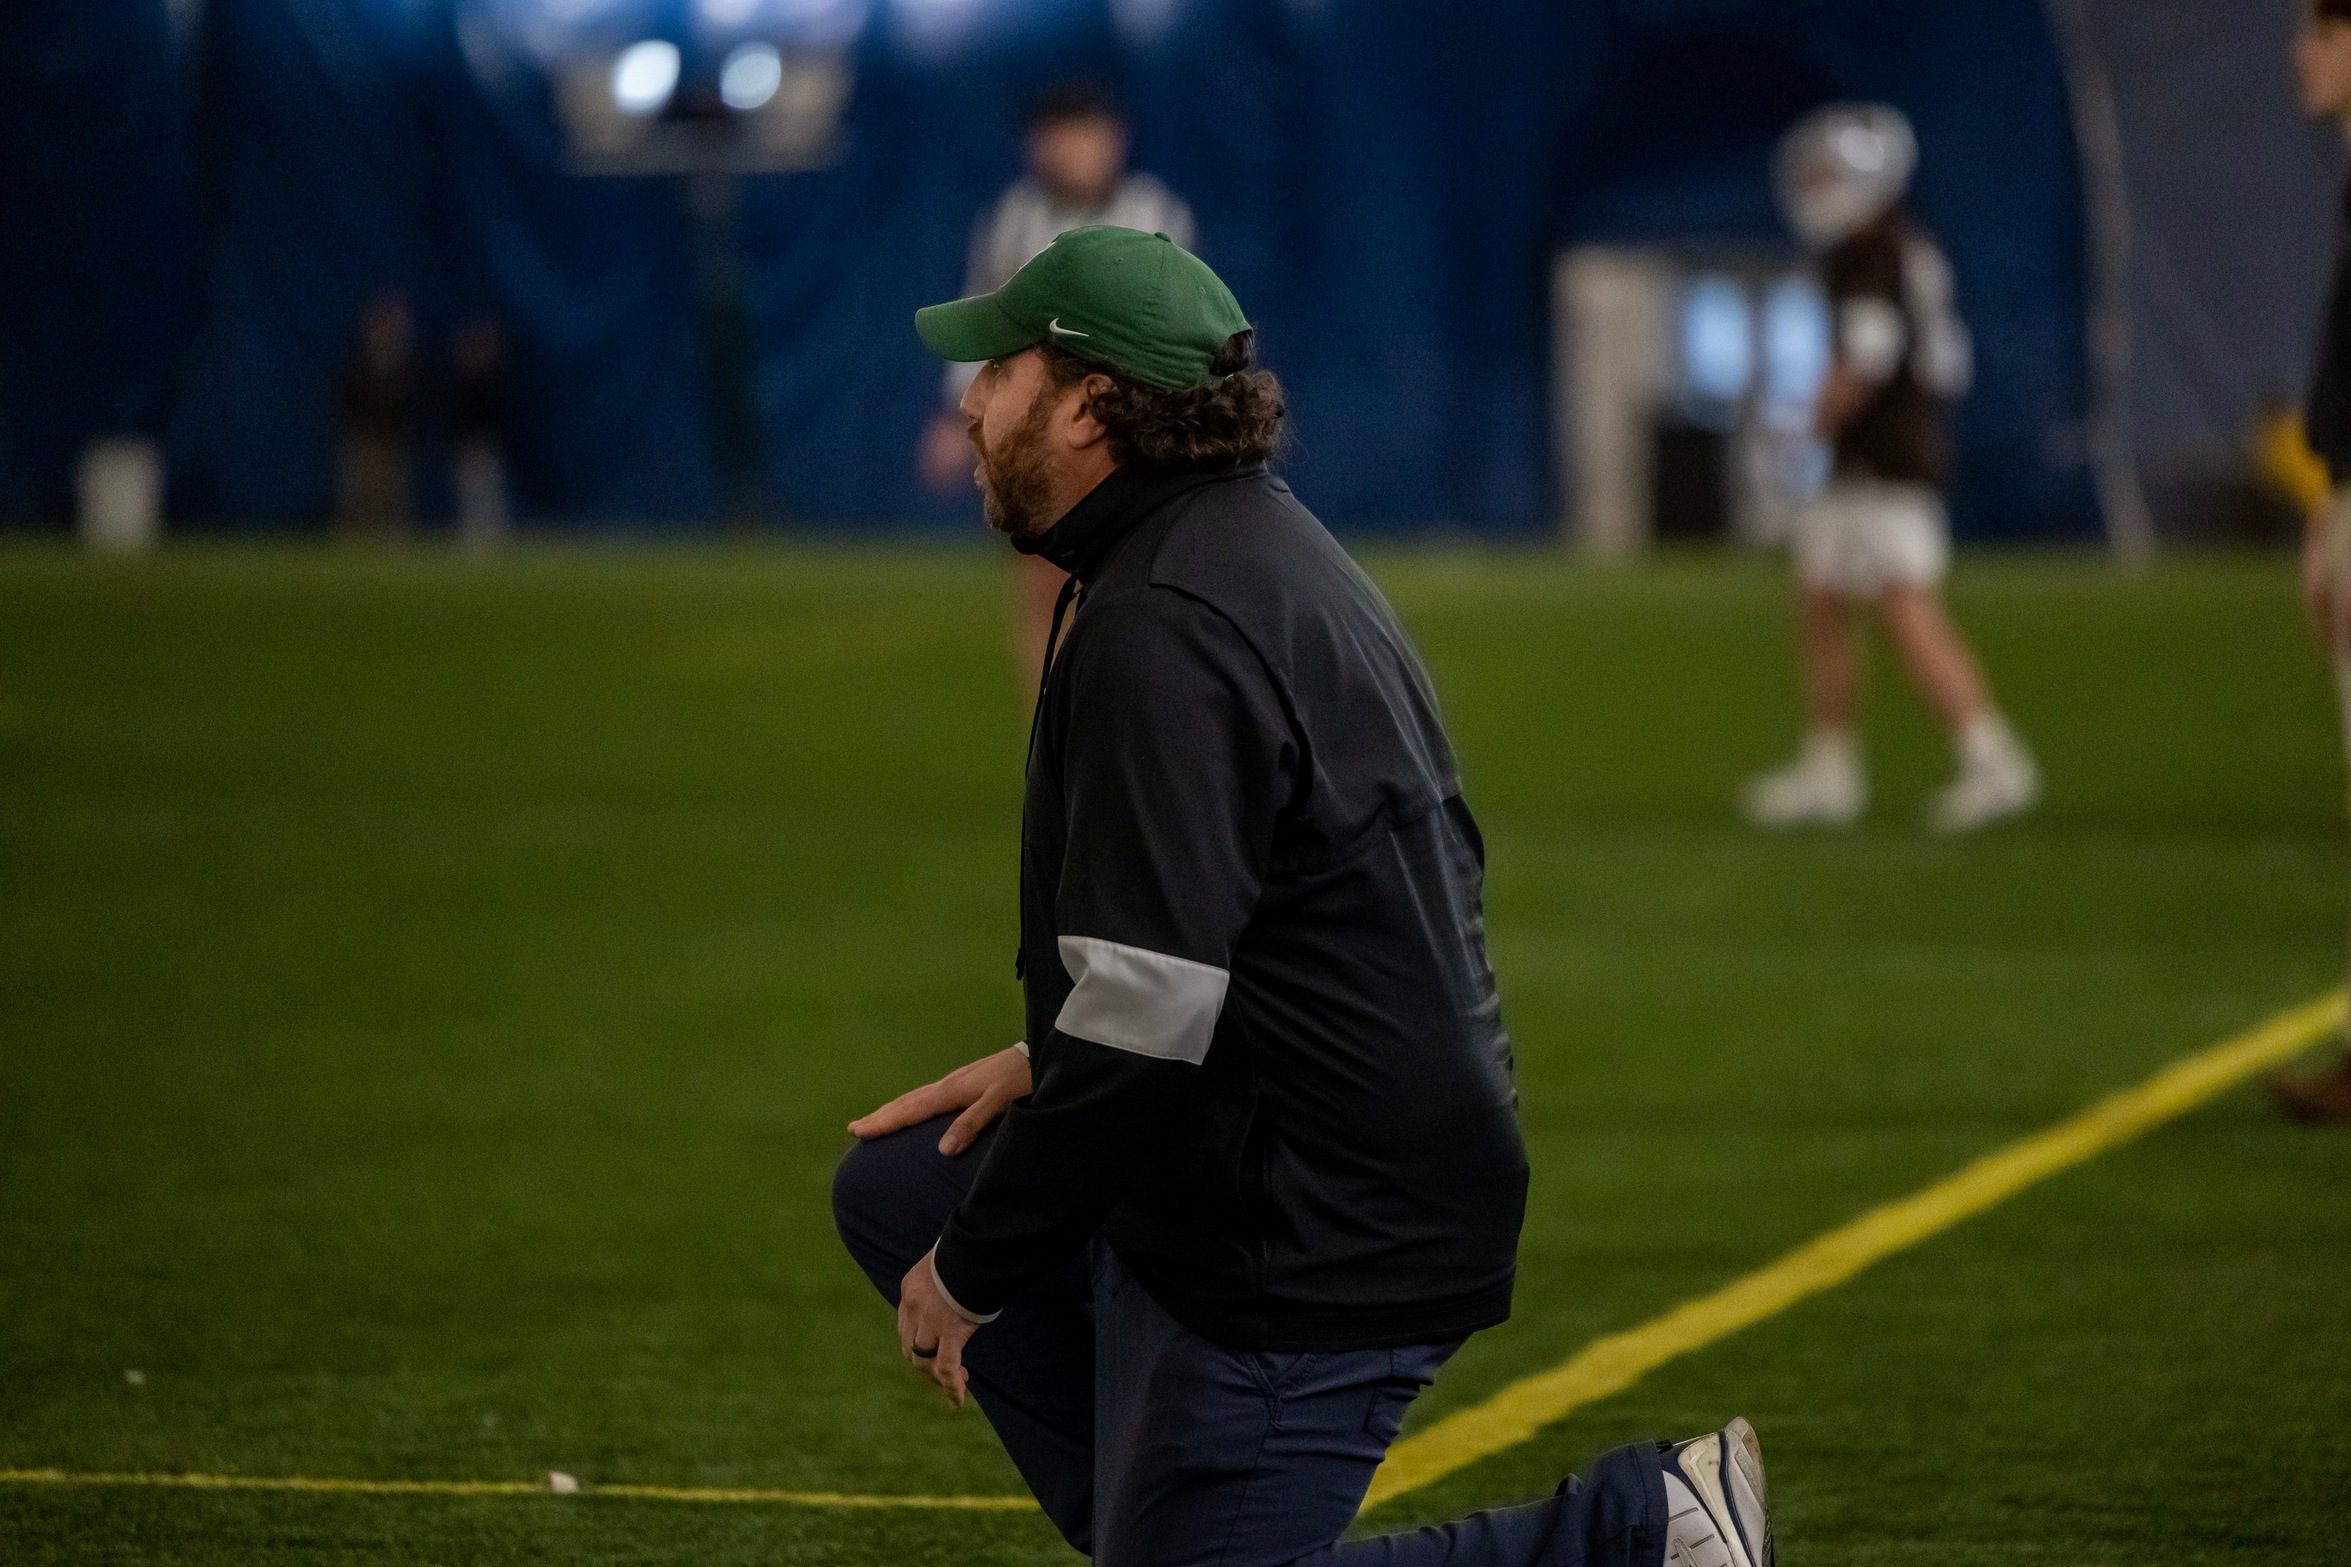 Cleveland State Lacrosse Clinches First Postseason Spot After Defeating Detroit